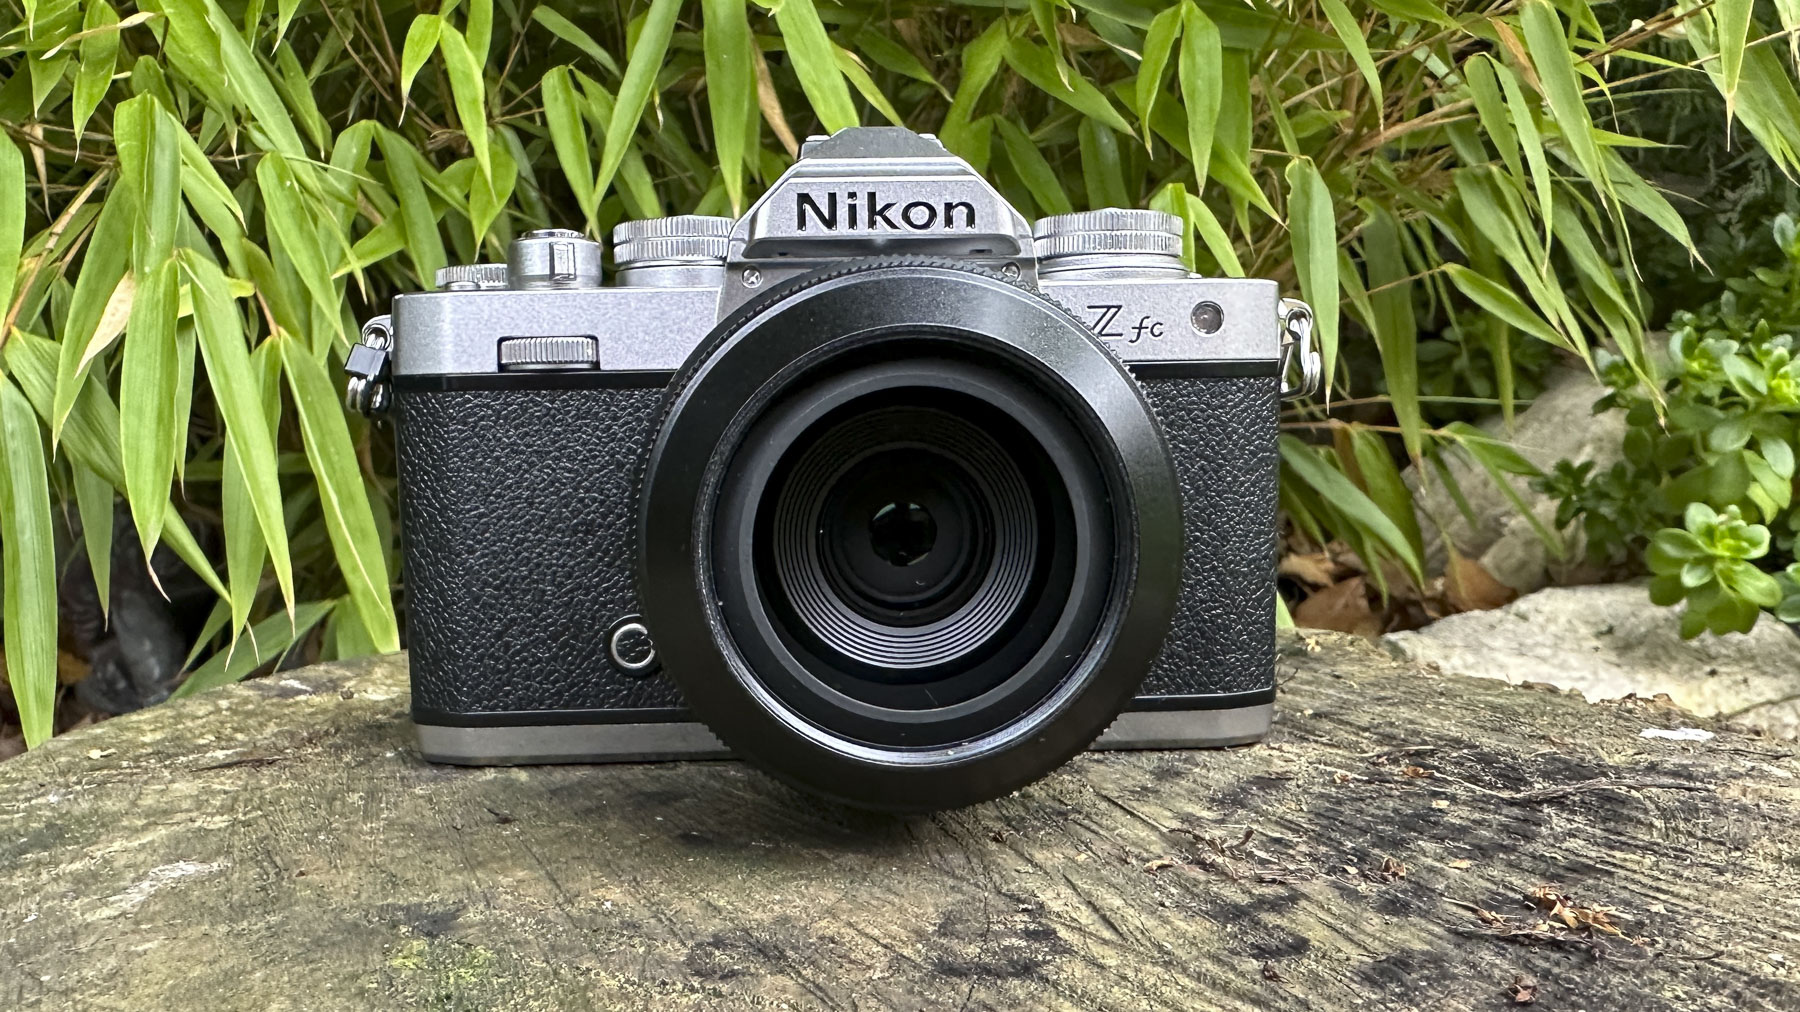 Nikkor Z DX 24mm f/1.7 lens front view with the lens mounted on a Nikon Z fc camera